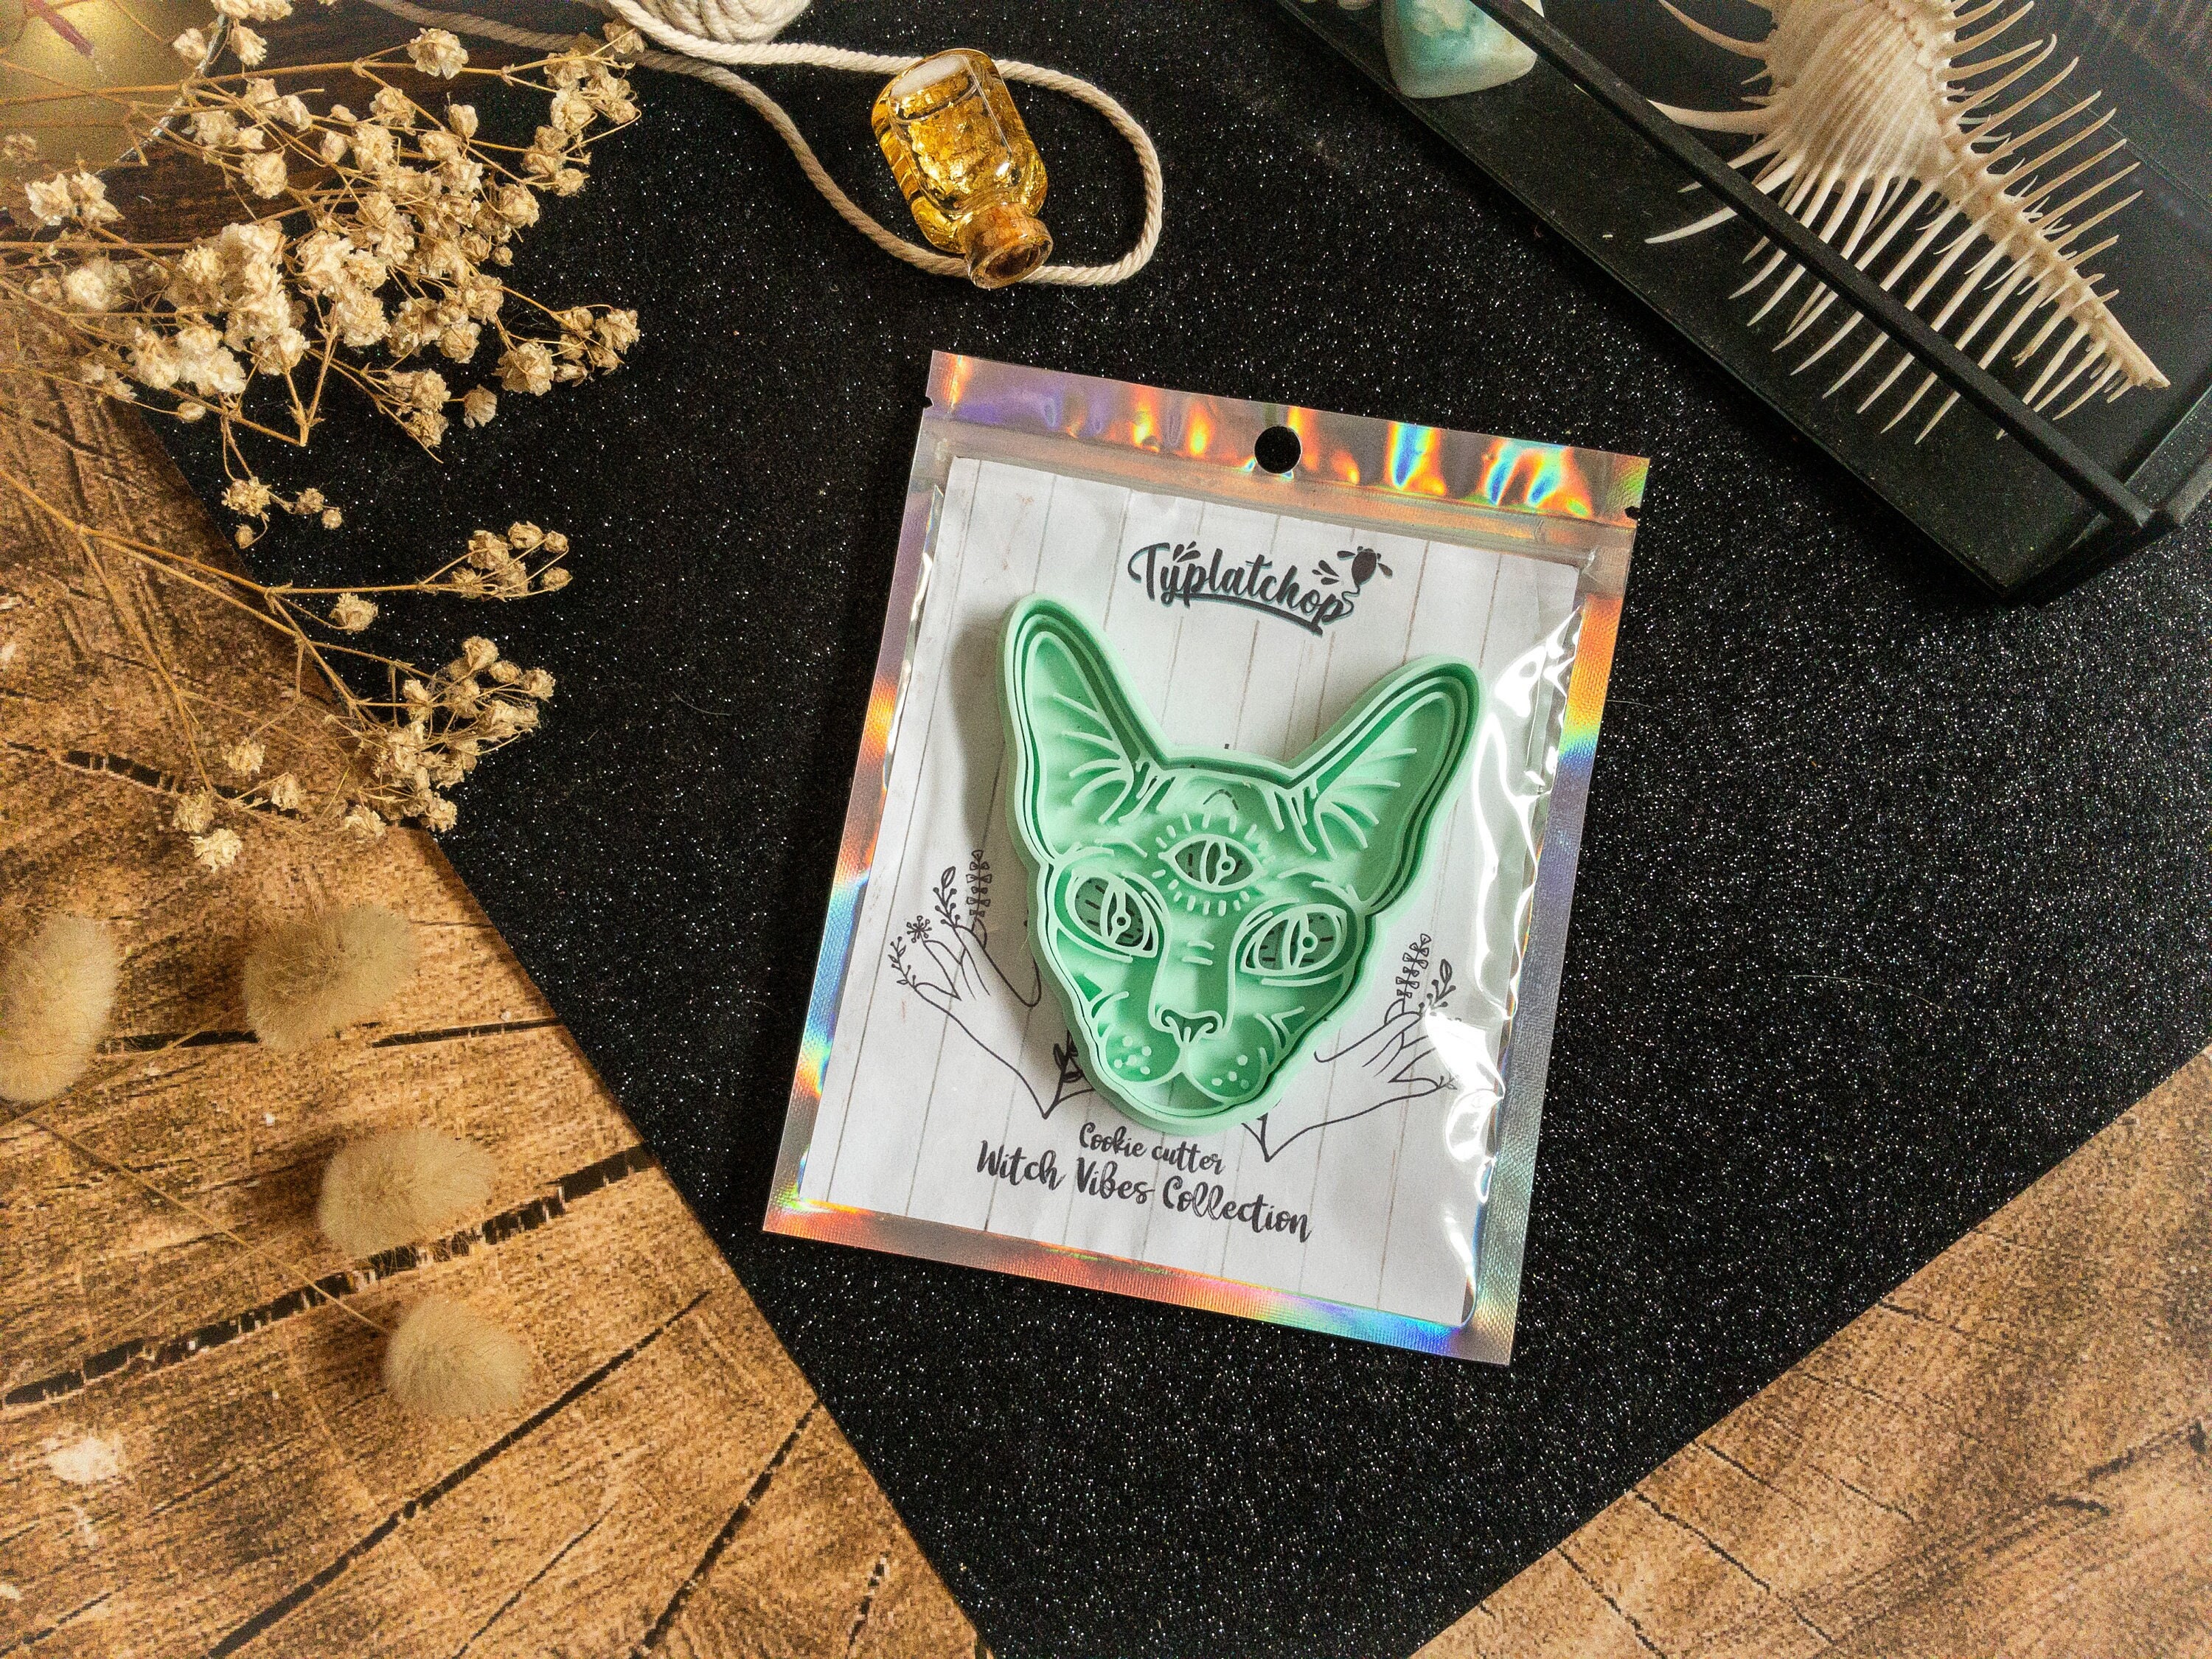 Emporte-Pièce 3 Eye Cat Chat Sphynx/Witch Vibes Biscuit Personnalisé Meowgic Astrologie Spiritual 3r